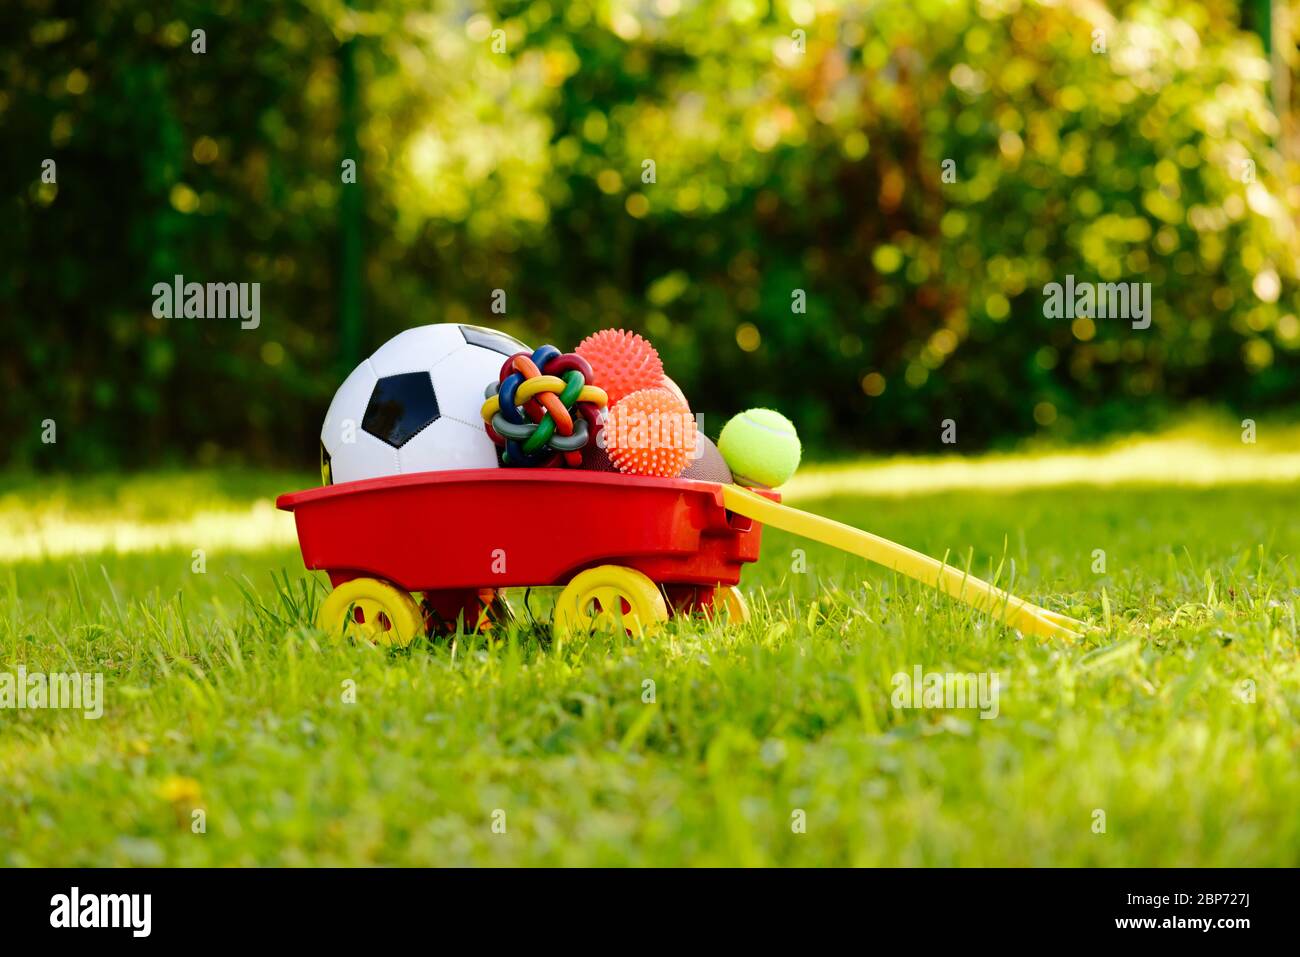 Concept of dogs life enrichment with cart full of pet and sport balls and toys Stock Photo